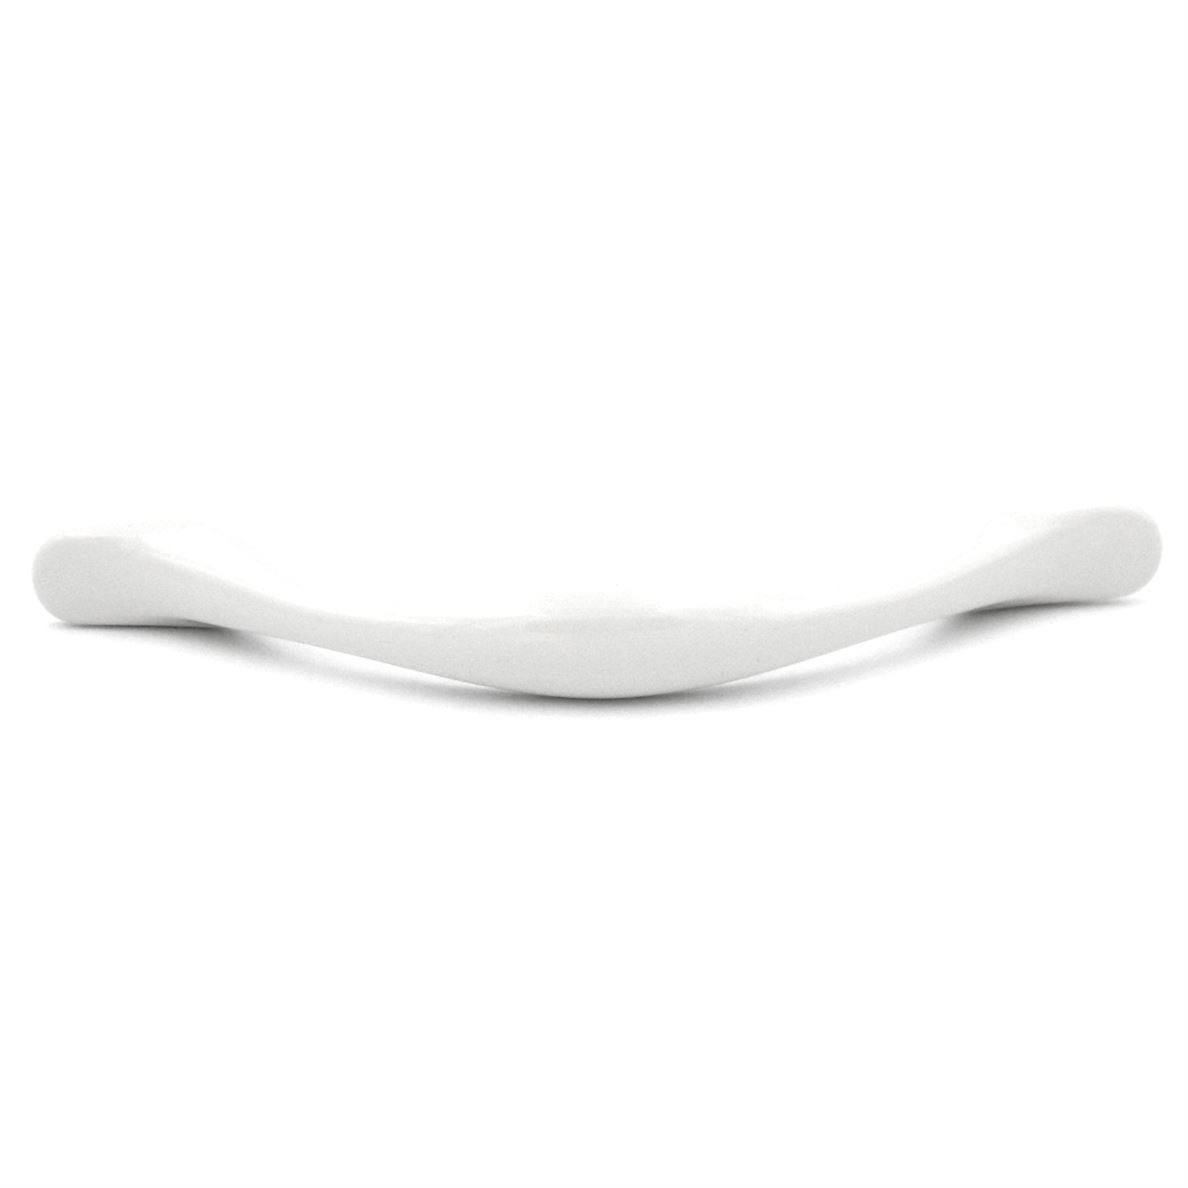 P333-24 White Frosted Deco 3"cc Cabinet Handles Pulls Belwith Hickory's Eclipse